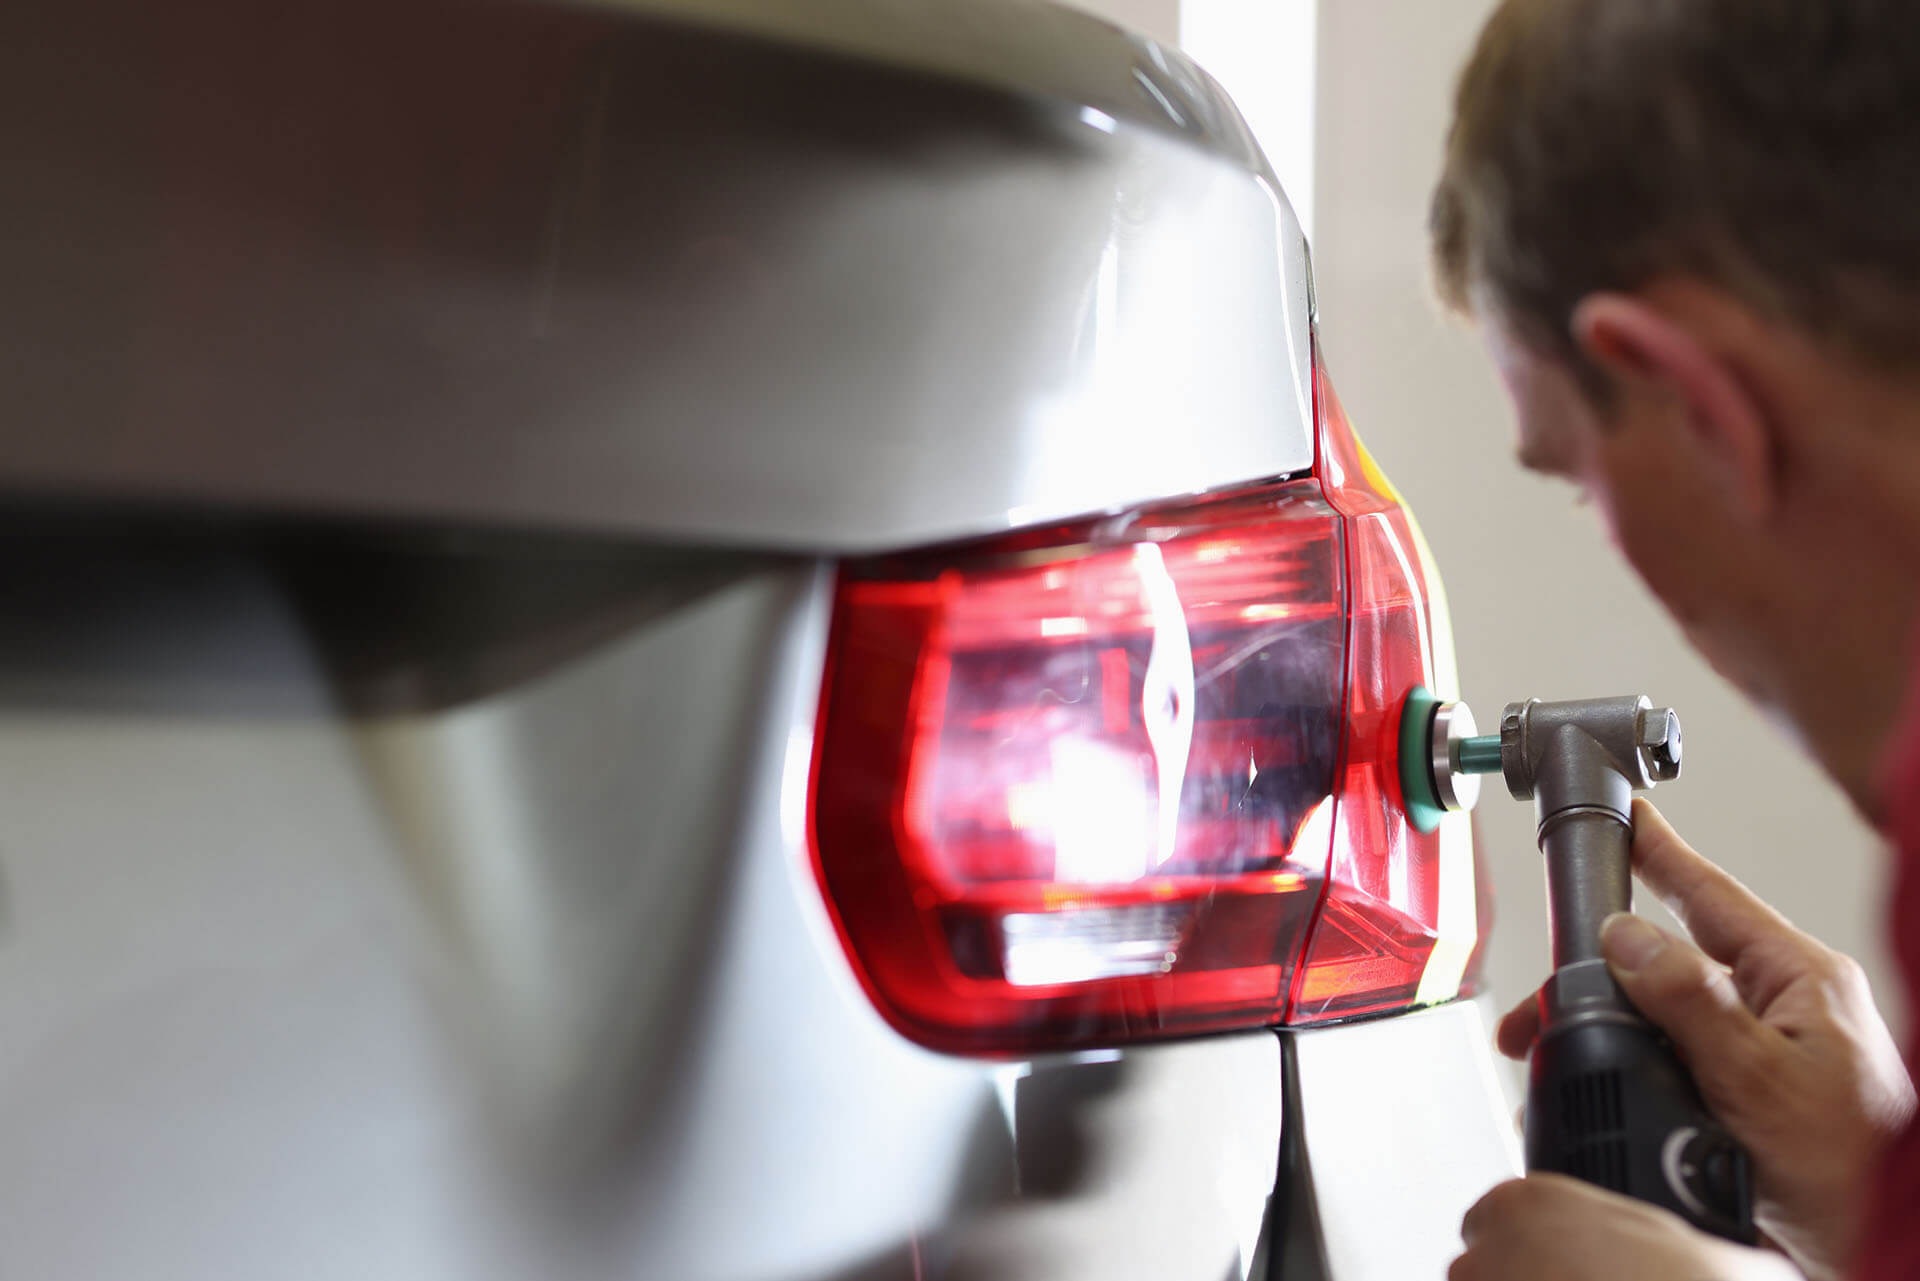 Headlights and taillights can become dimmed from damage, but can be restored instead of replaced.